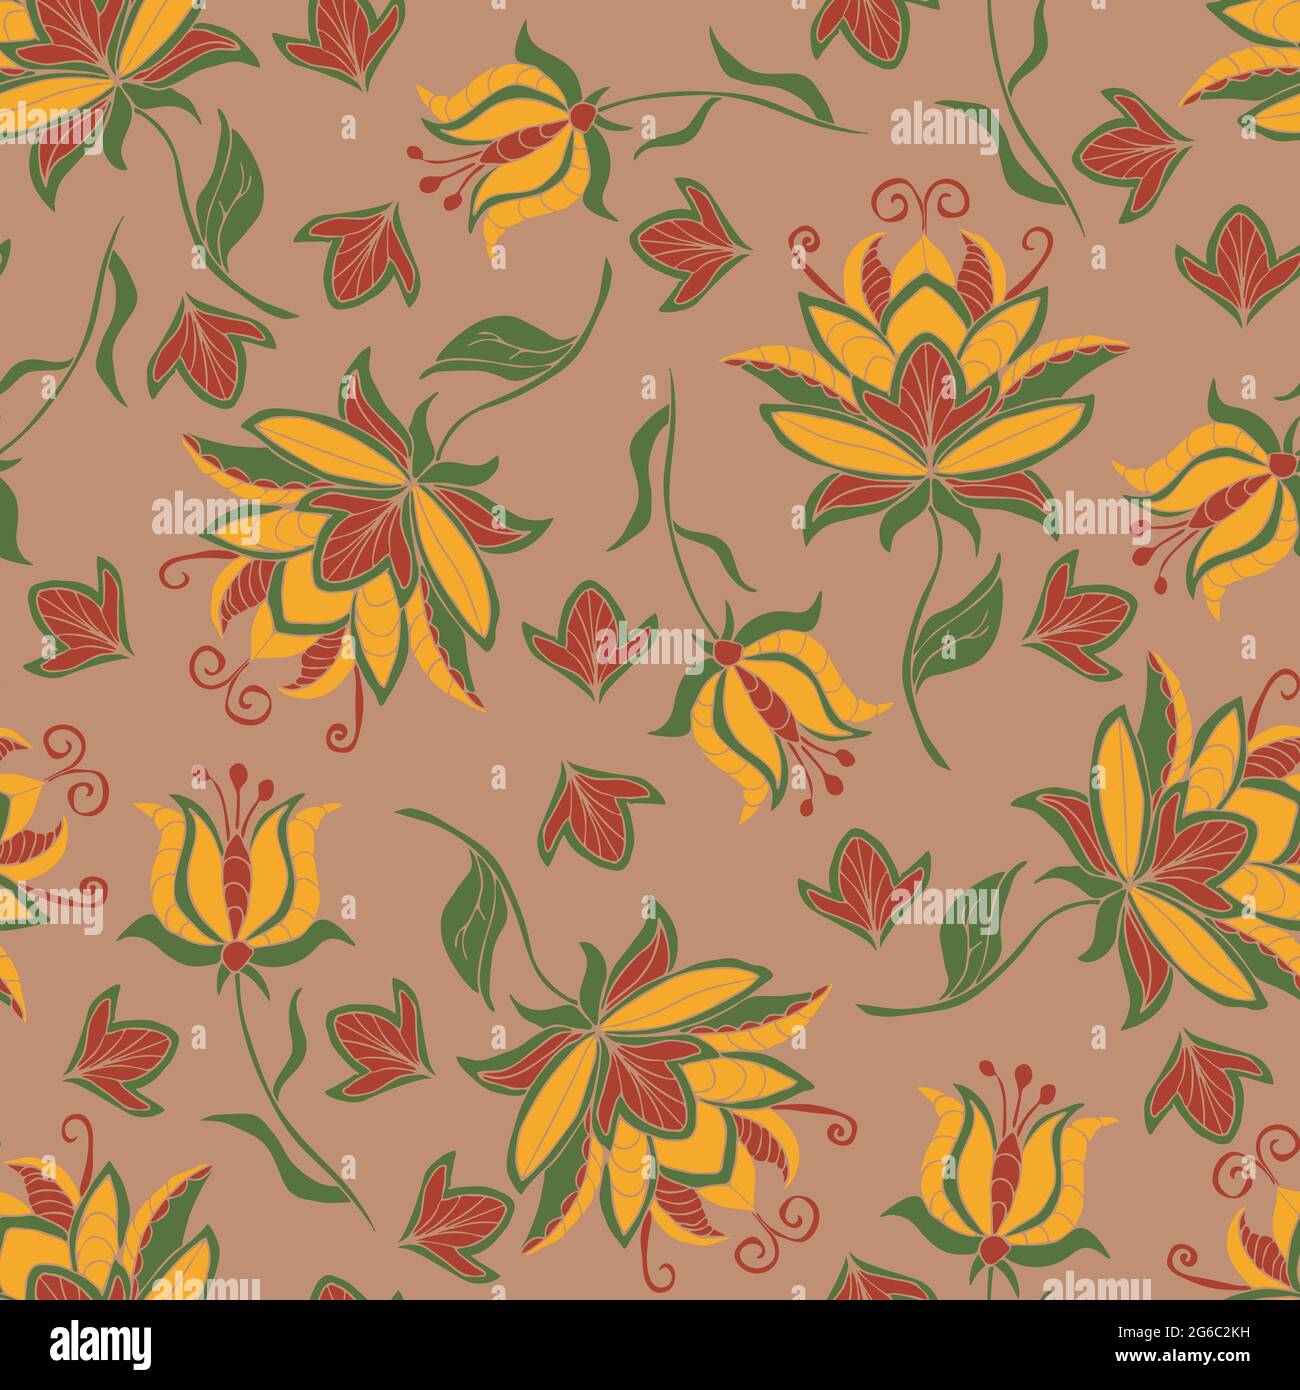 Seamless vector pattern with yellow flowers on beige background. Beautiful vintage floral wallpaper design. Embroidery fashion textile. Stock Vector